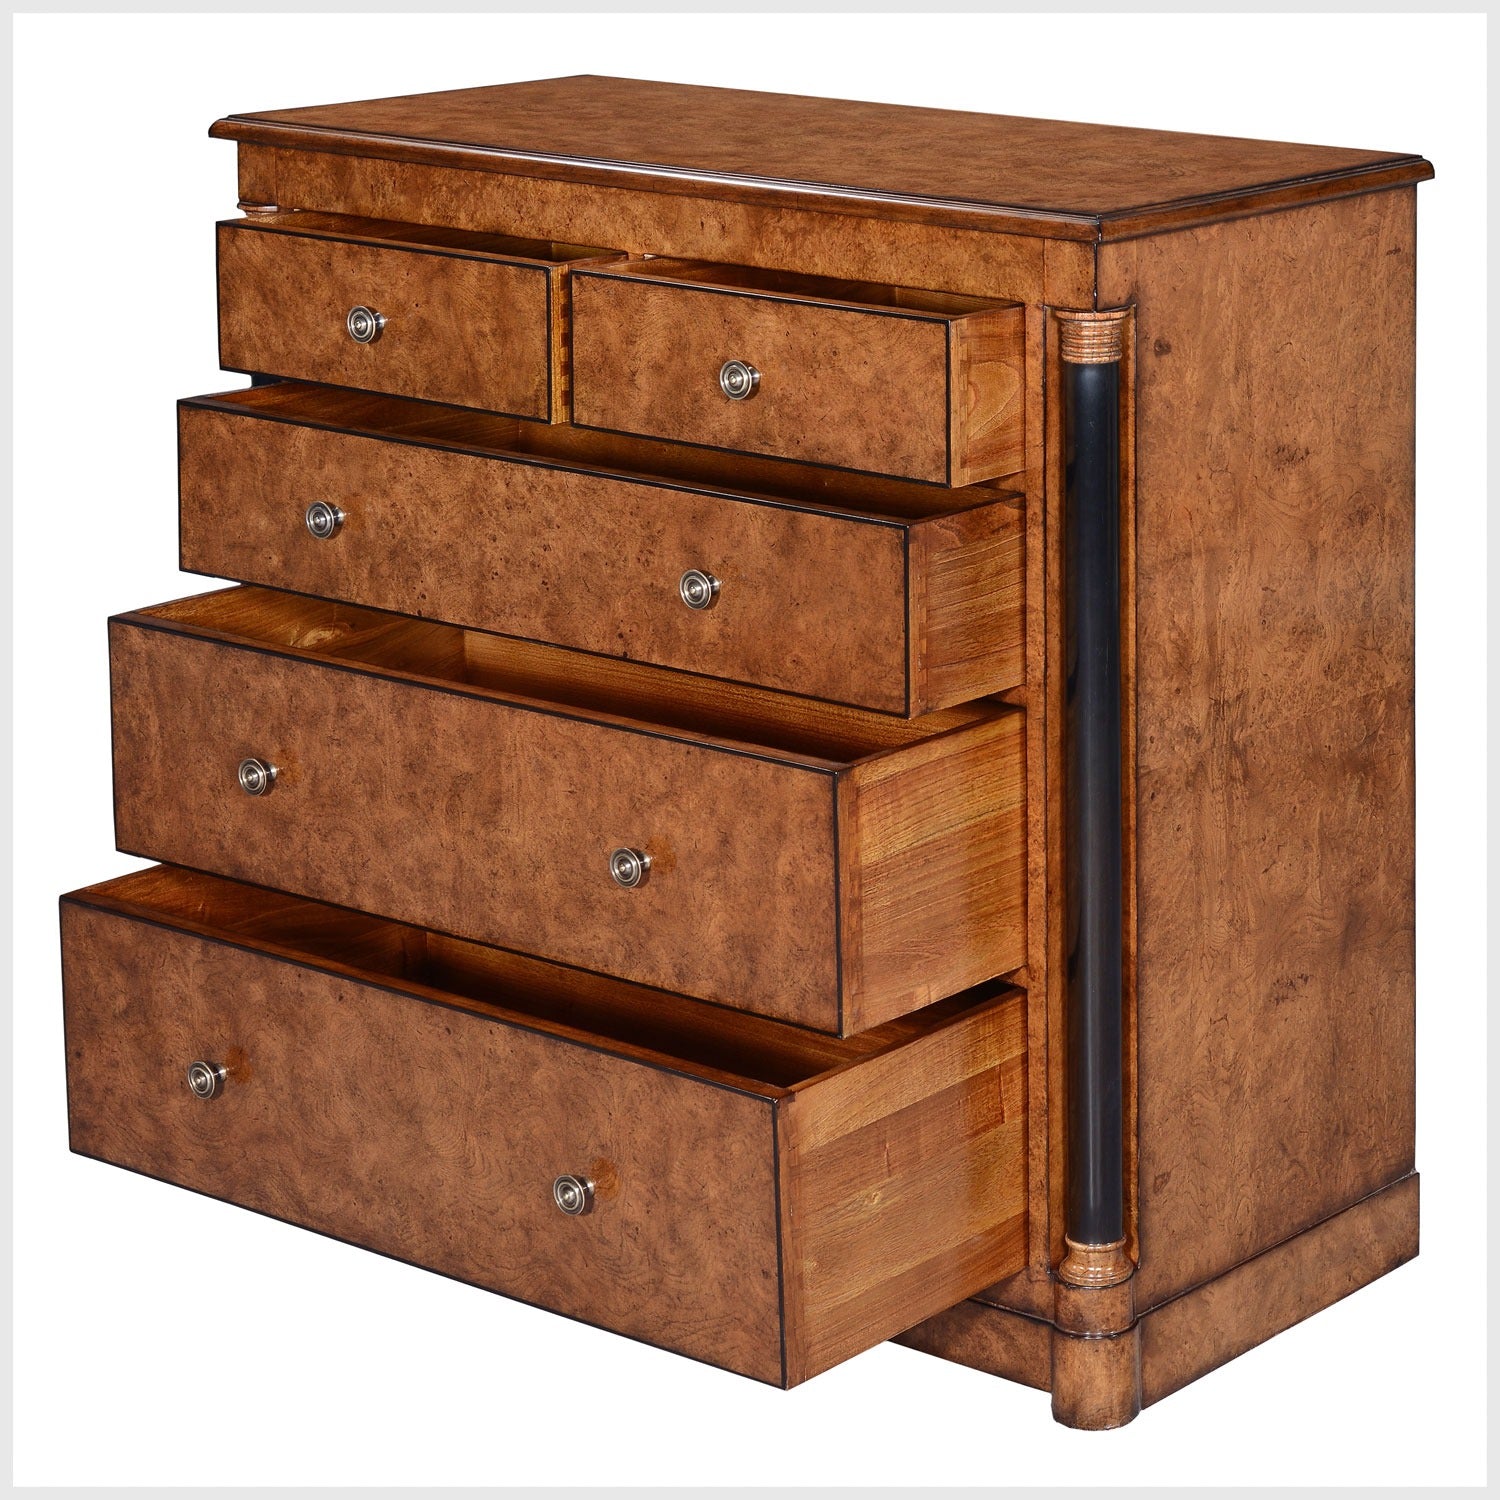 Empire chest of 5 drawers - burr oak with ebony